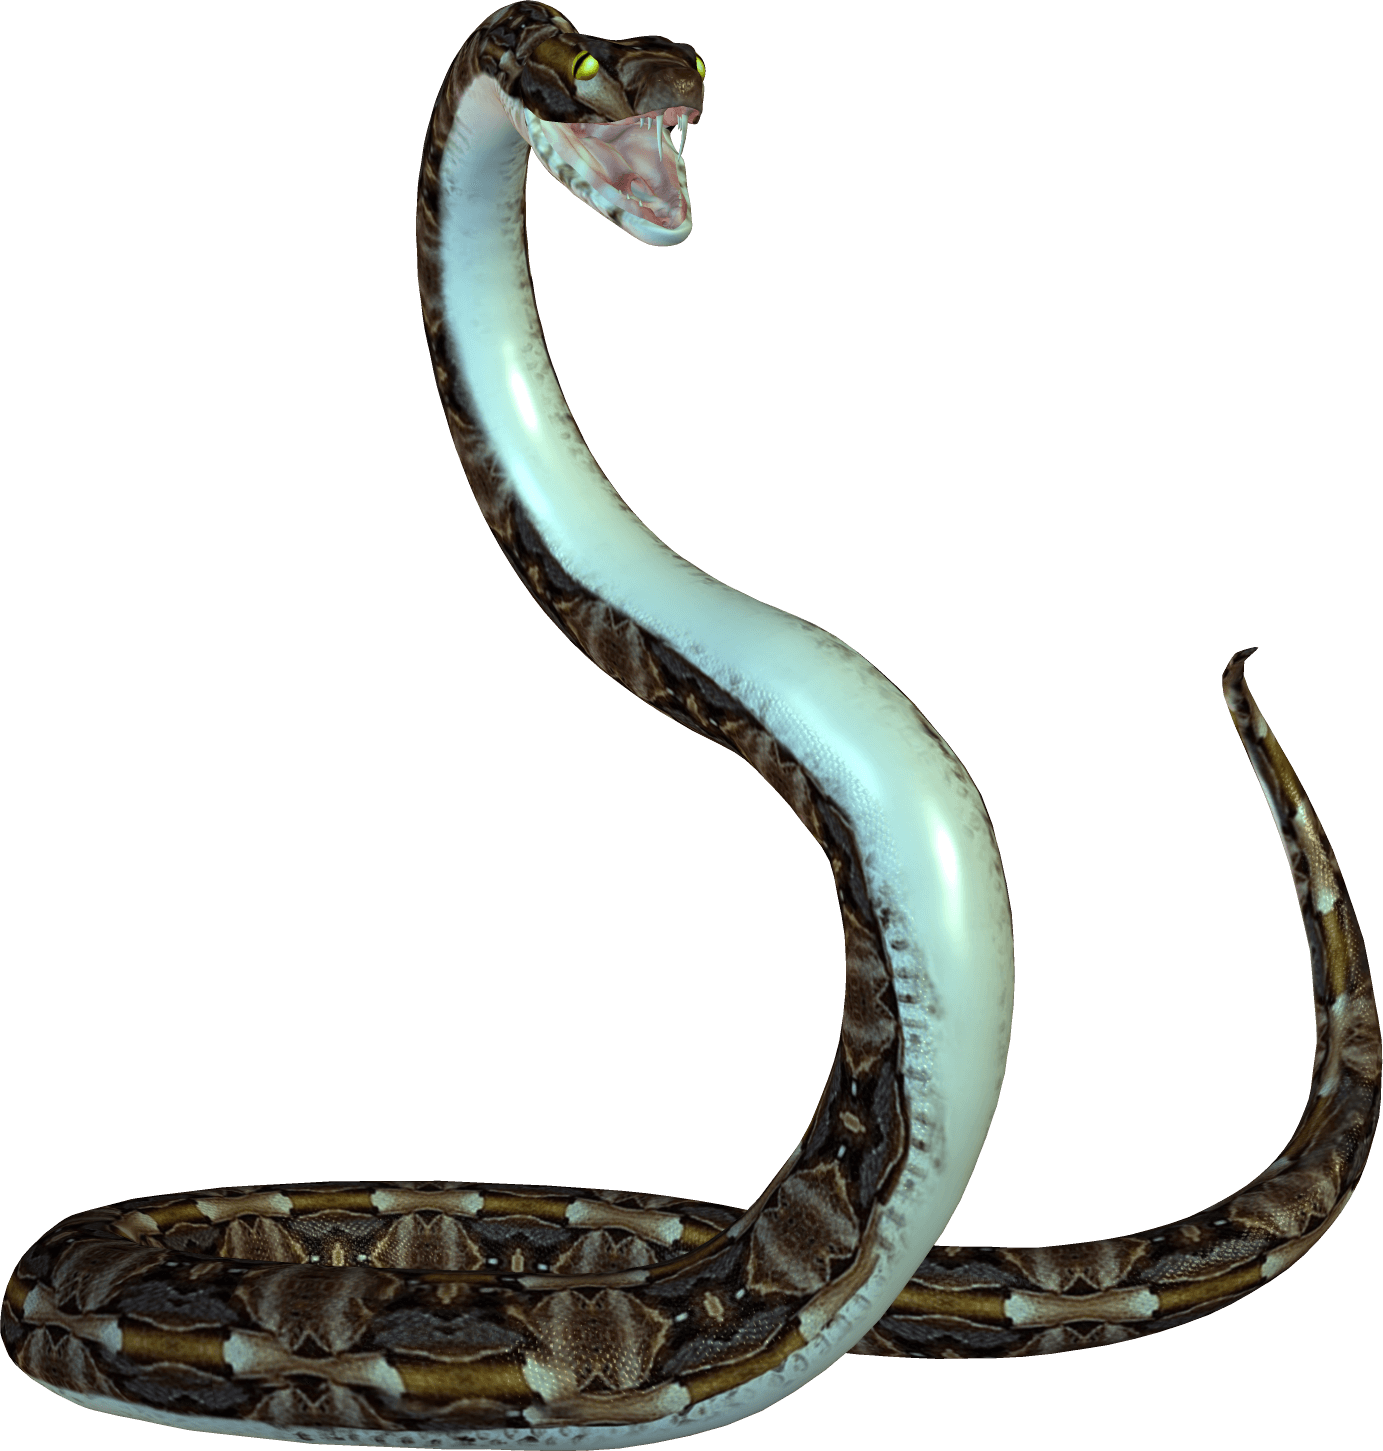 Download Animated Snake PNG Image for Free